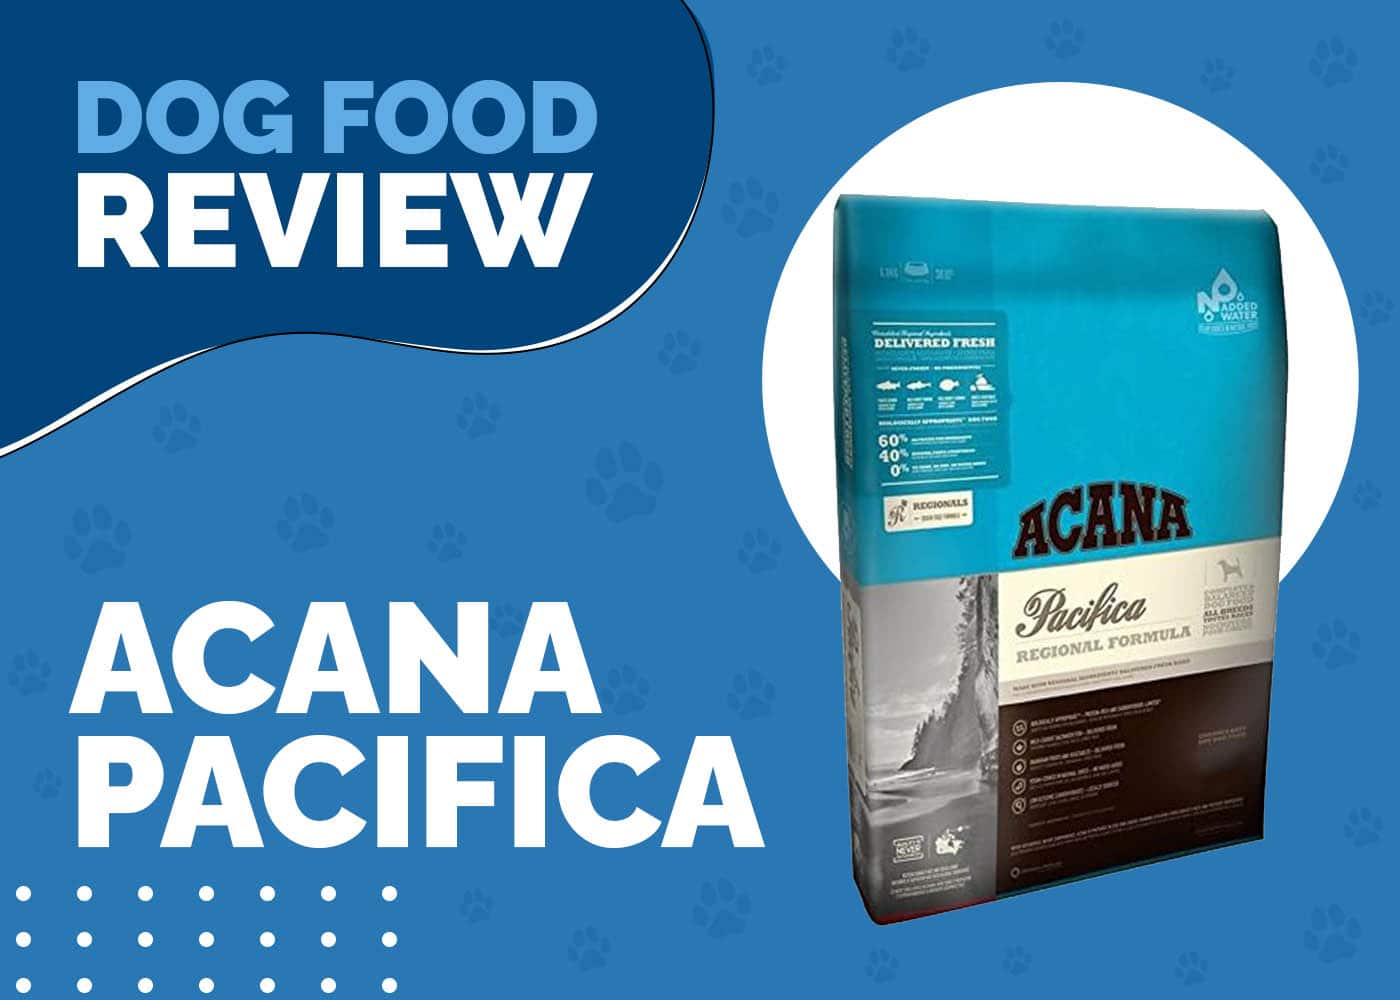 Acana Pacifica Dog Food Review